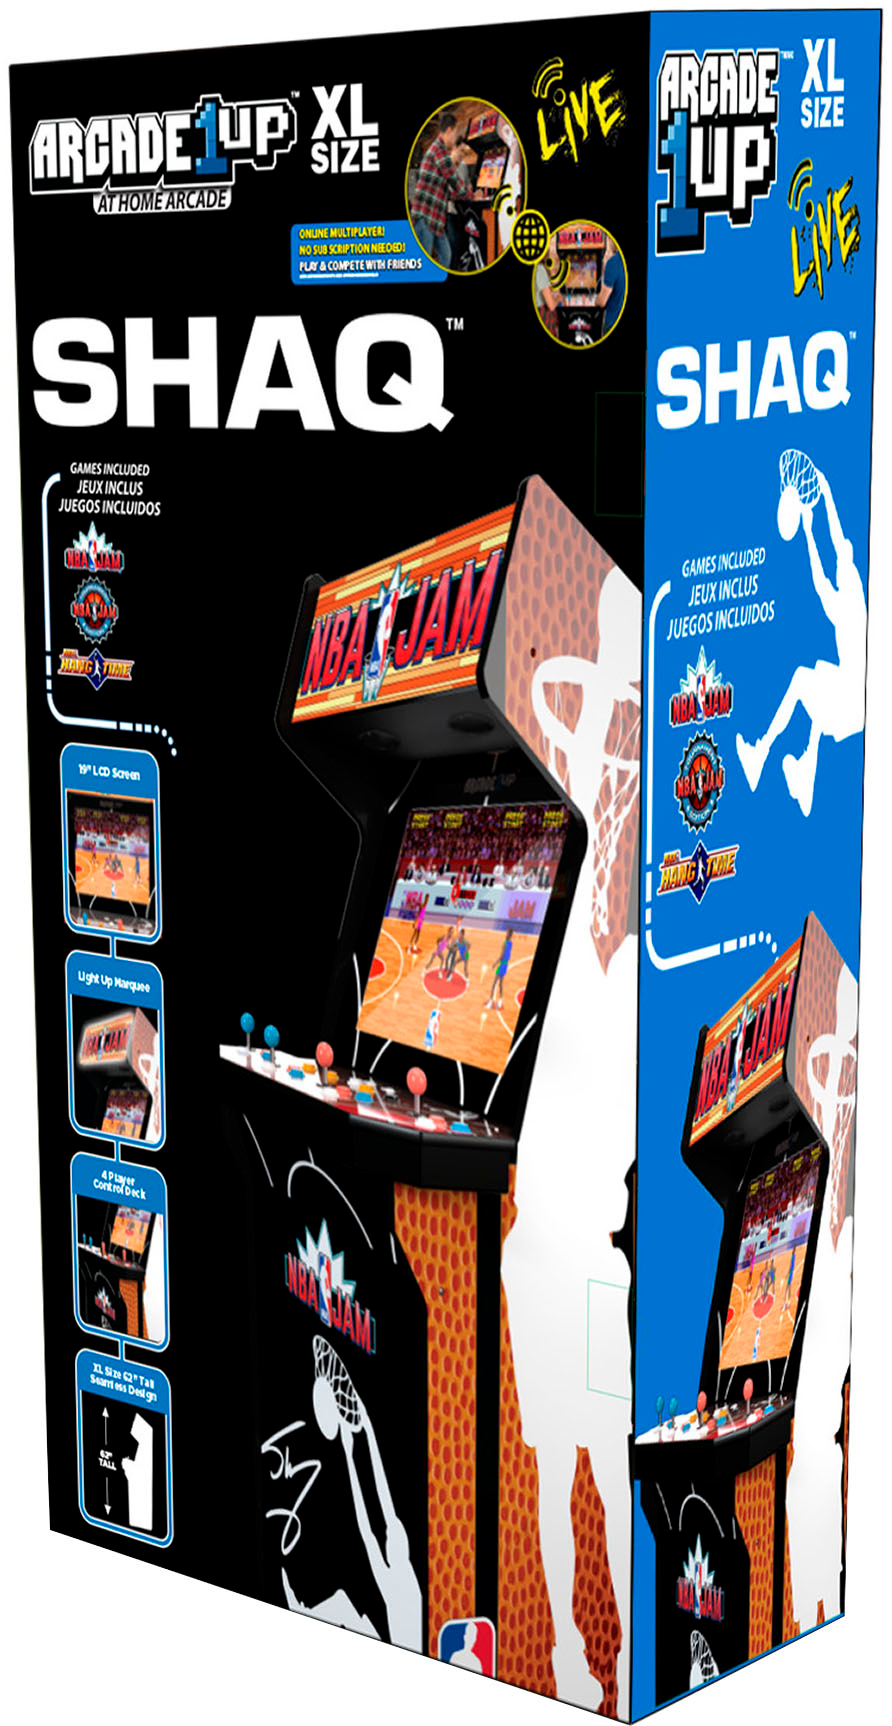 Save Up To $250 On Arcade1Up Cabinets At Best Buy - GameSpot